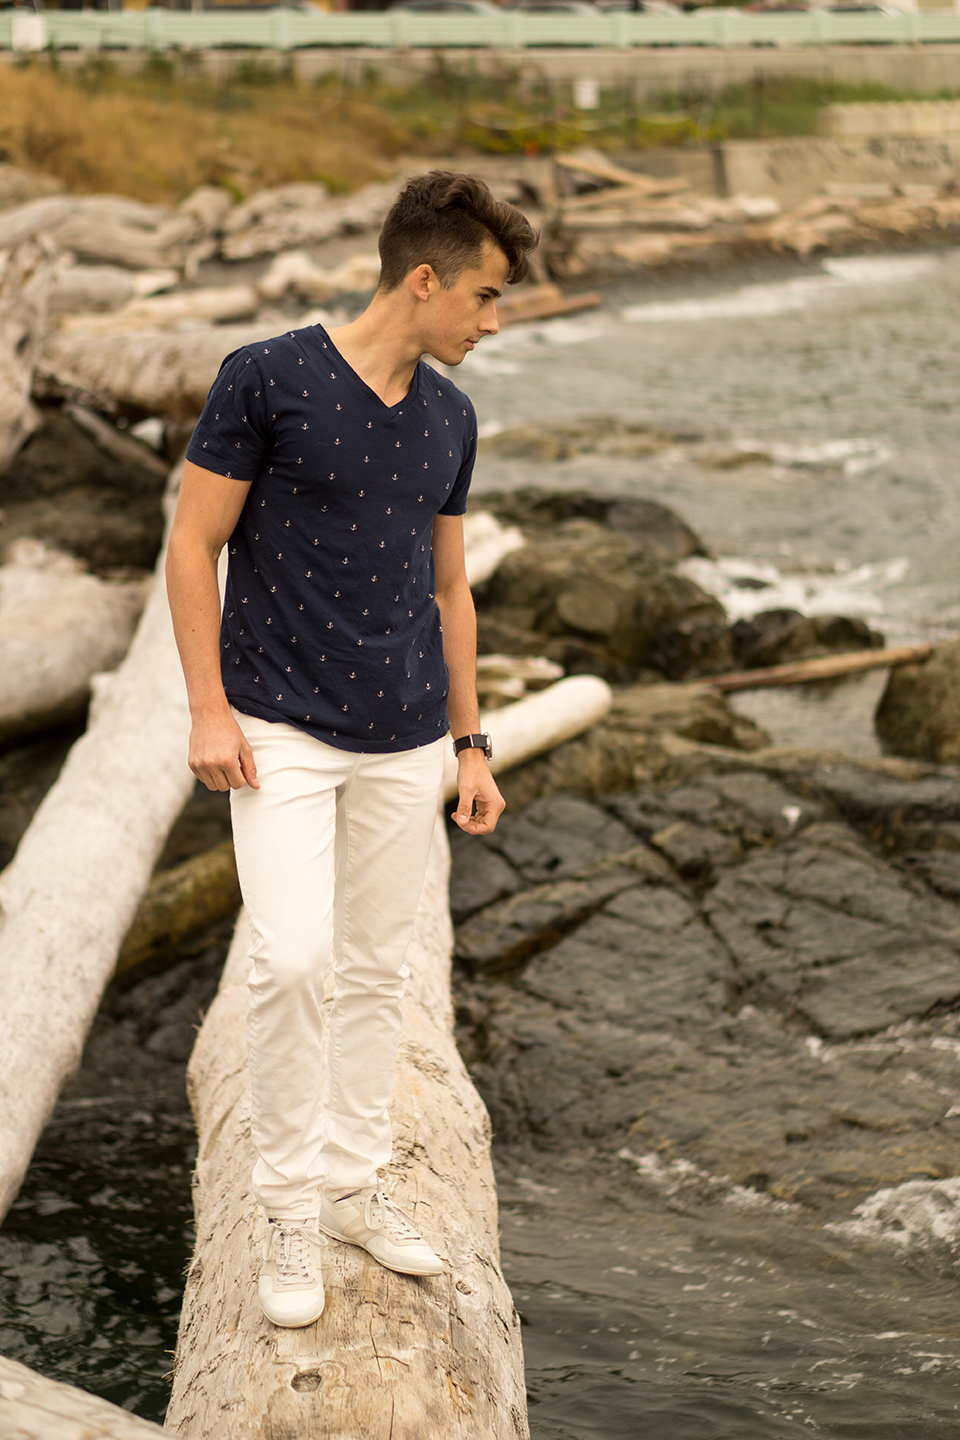 Nautical themed photo shoot with Model Tristan